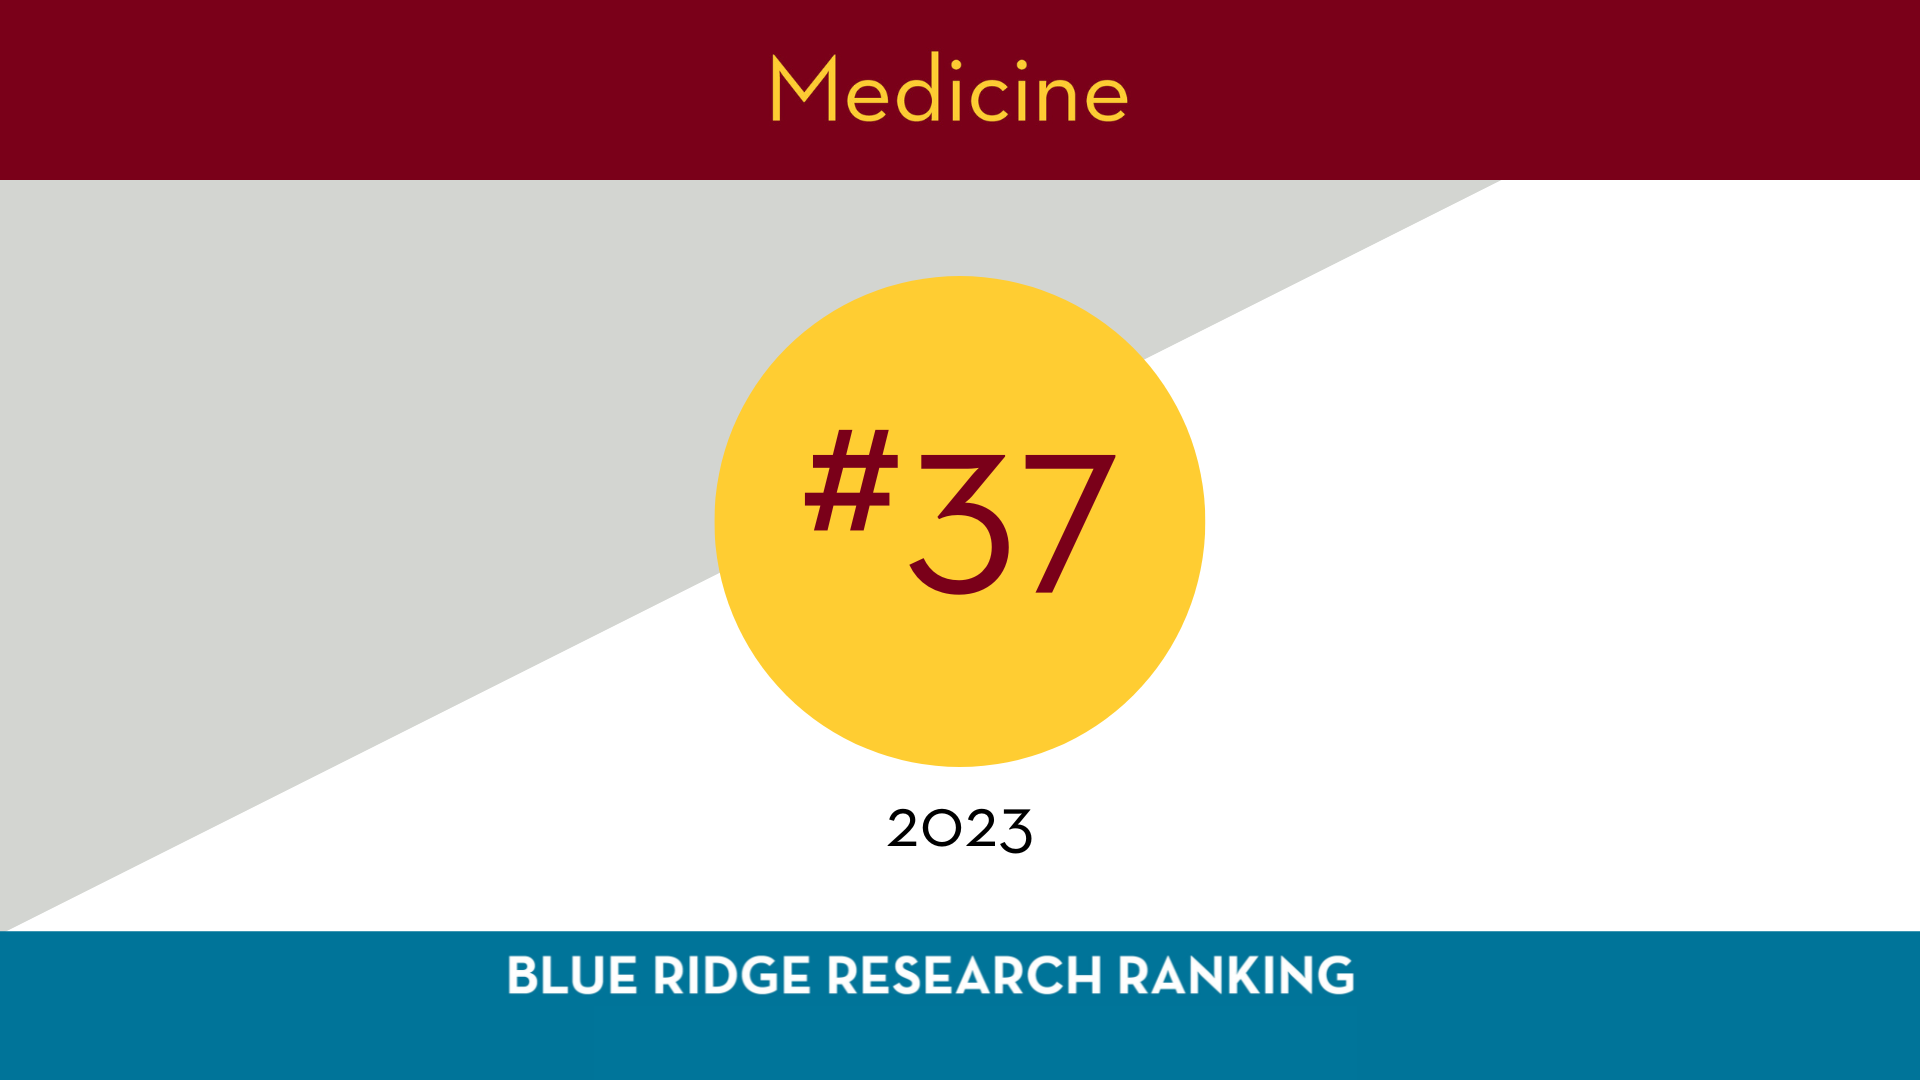 Blue Ridge Institute for Medical Research Ranking Places Medicine at #37!